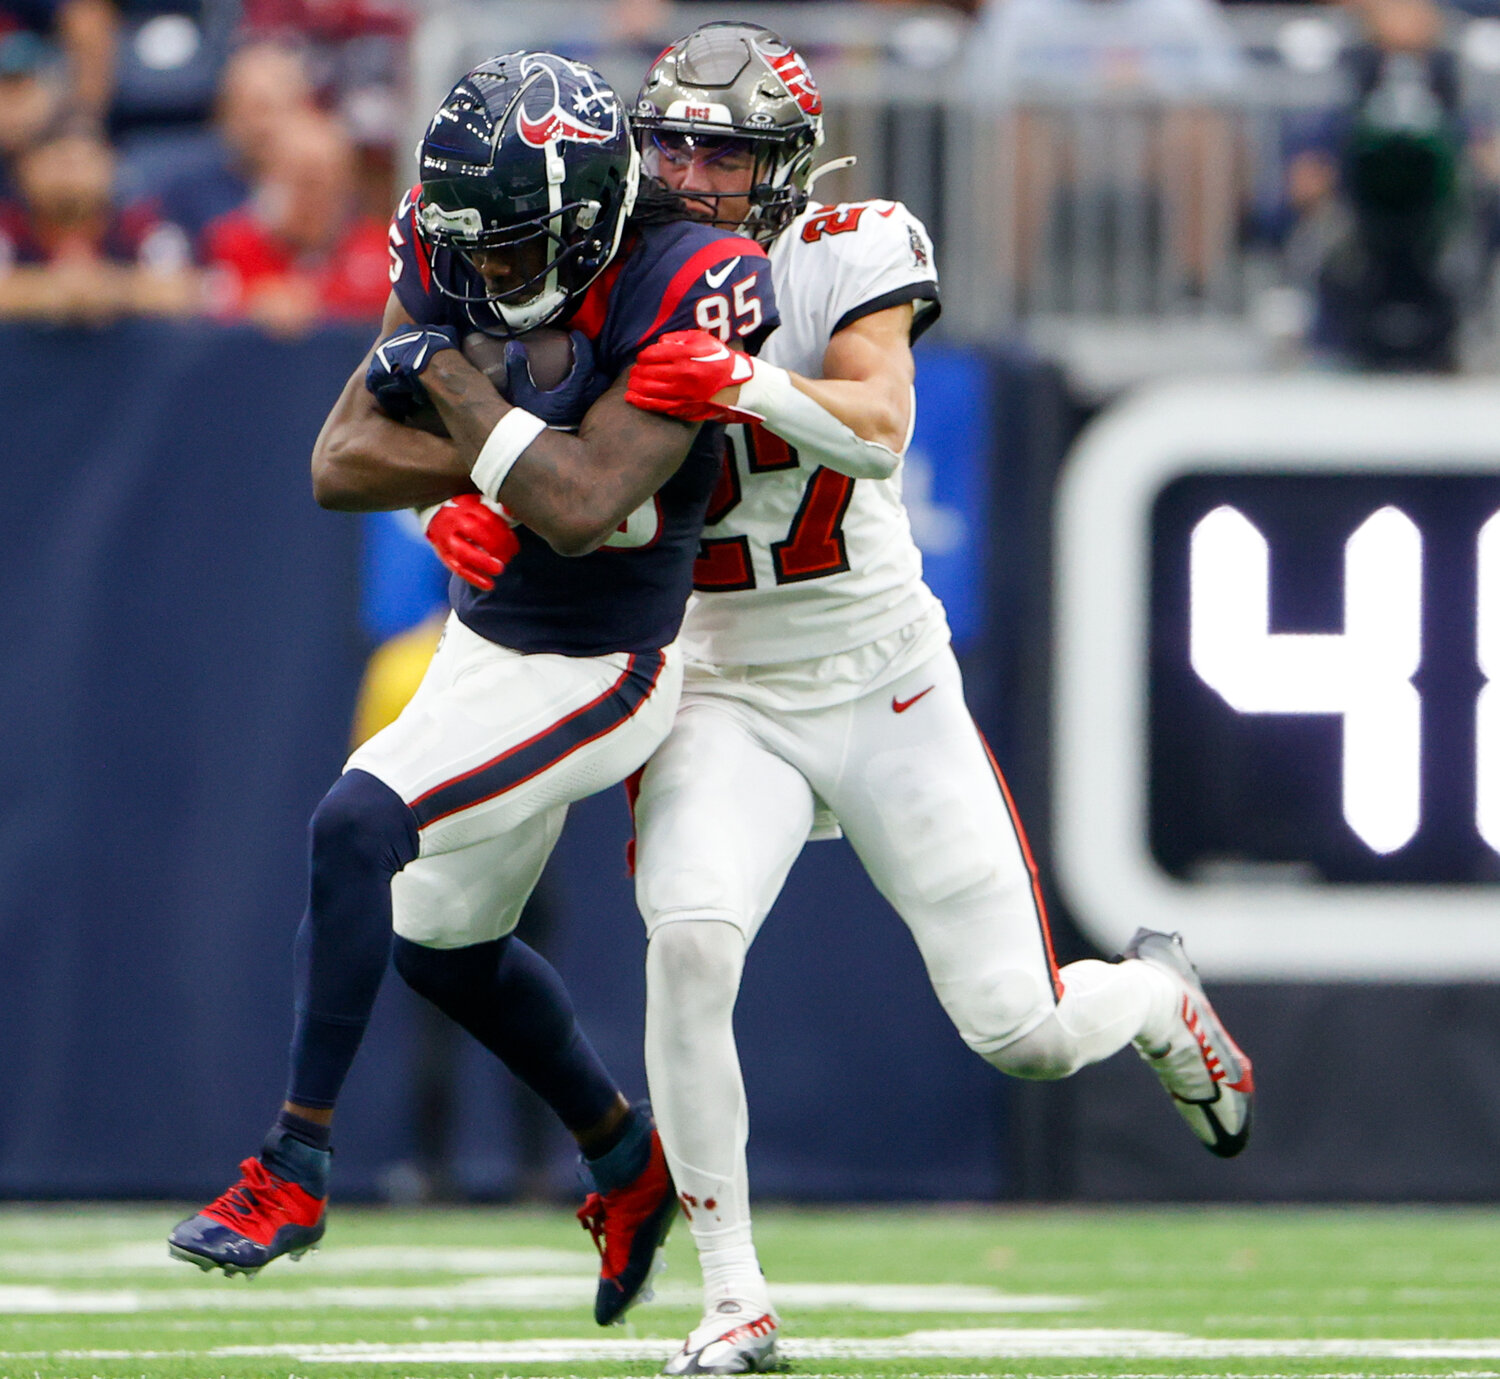 Buccaneers cornerback Zyon McCollum (27) tackles Texans wide receiver Noah Brown (85) after a catch during an NFL game between the Houston Texans and the Tampa Bay Buccaneers on November 5, 2023 in Houston.